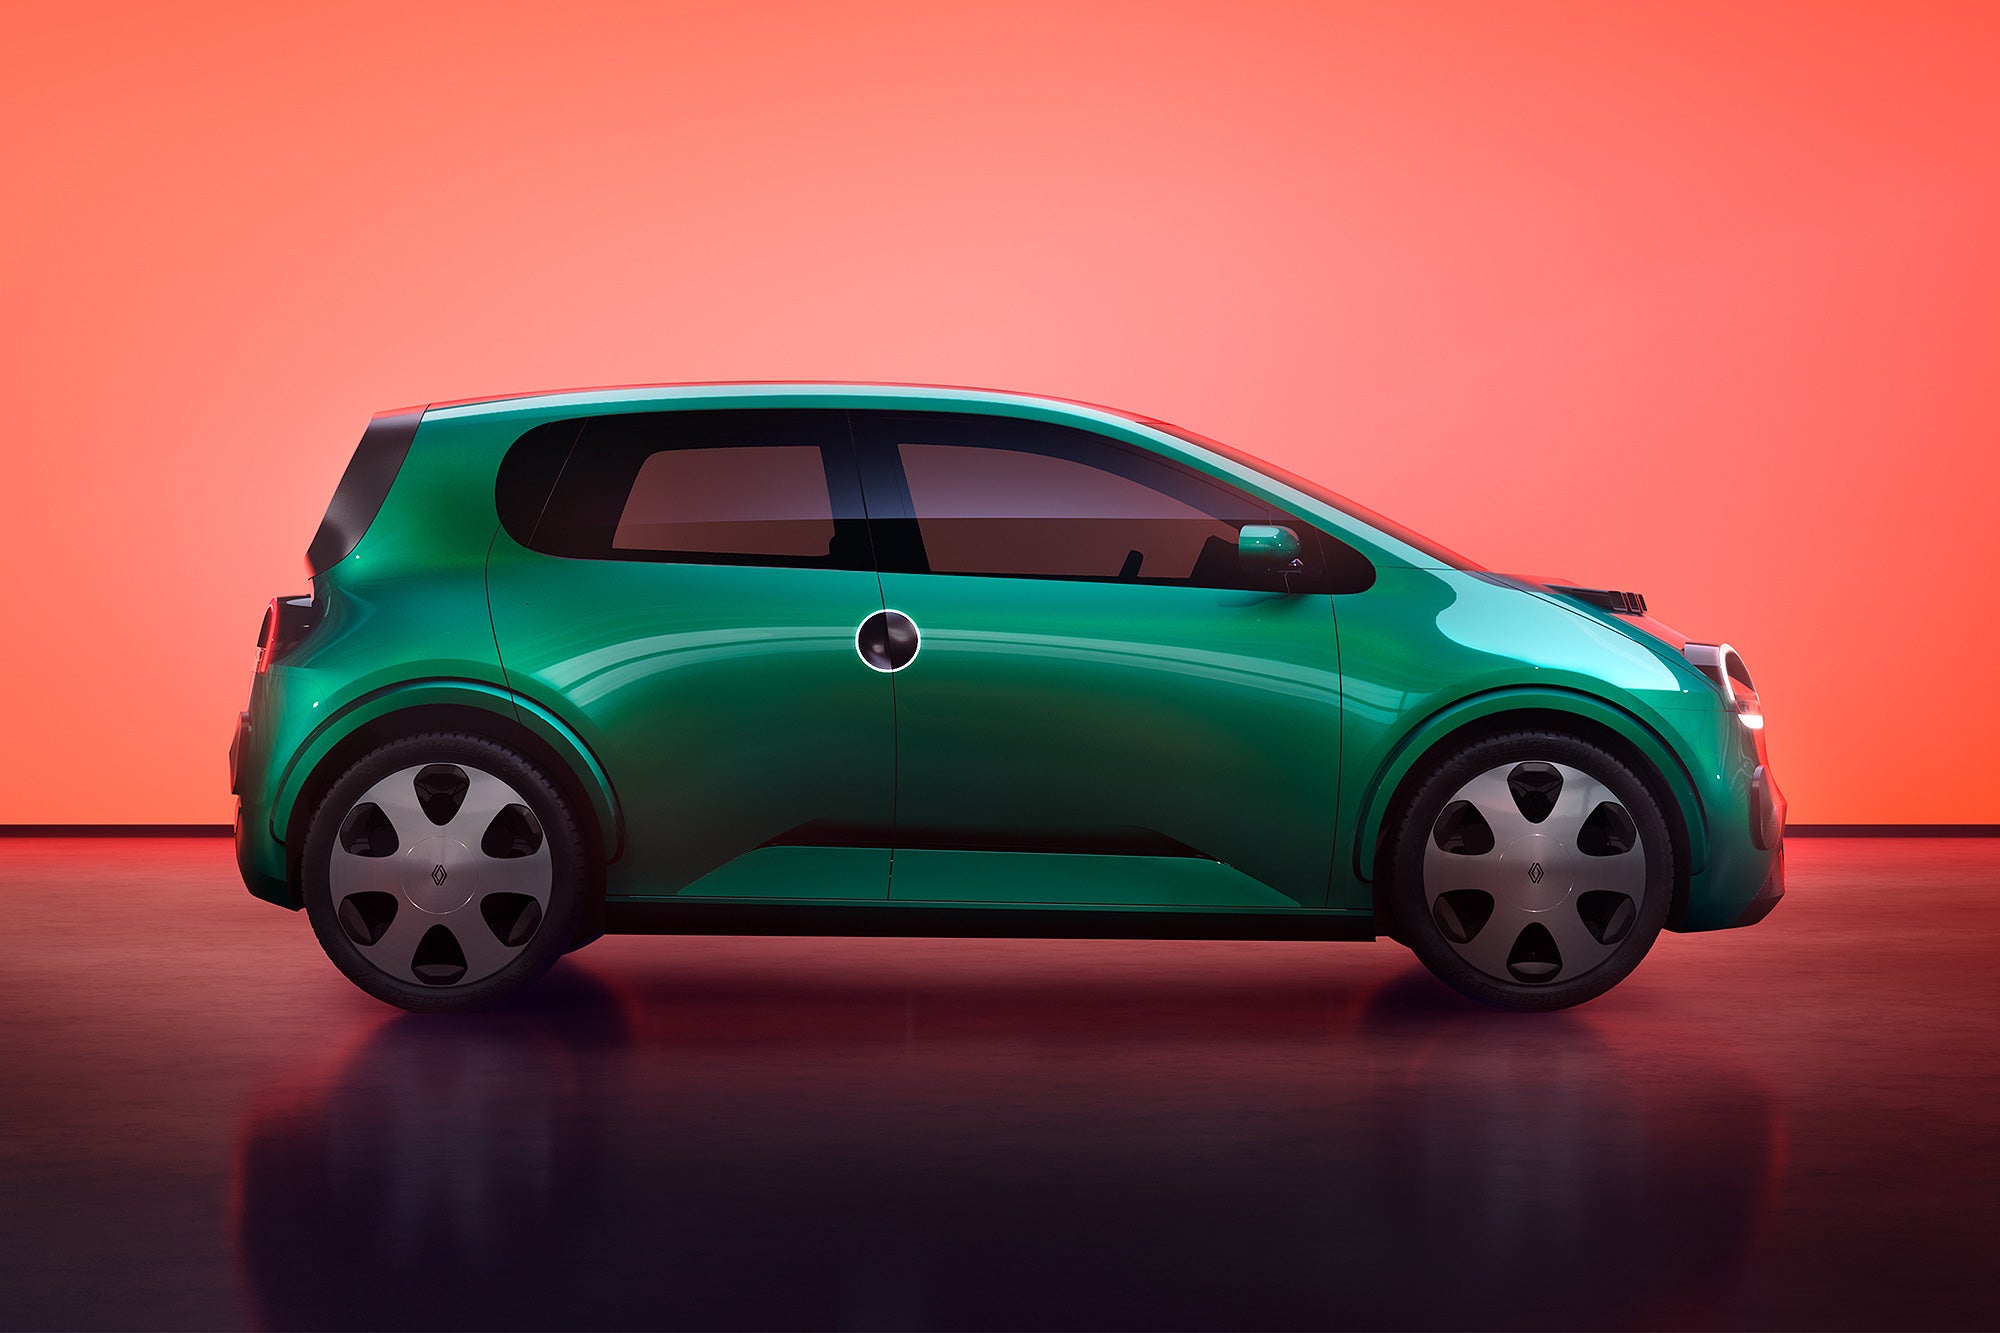 New Renault Twingo retails the 'monobox' format of the original, which will help with interior space and practicality